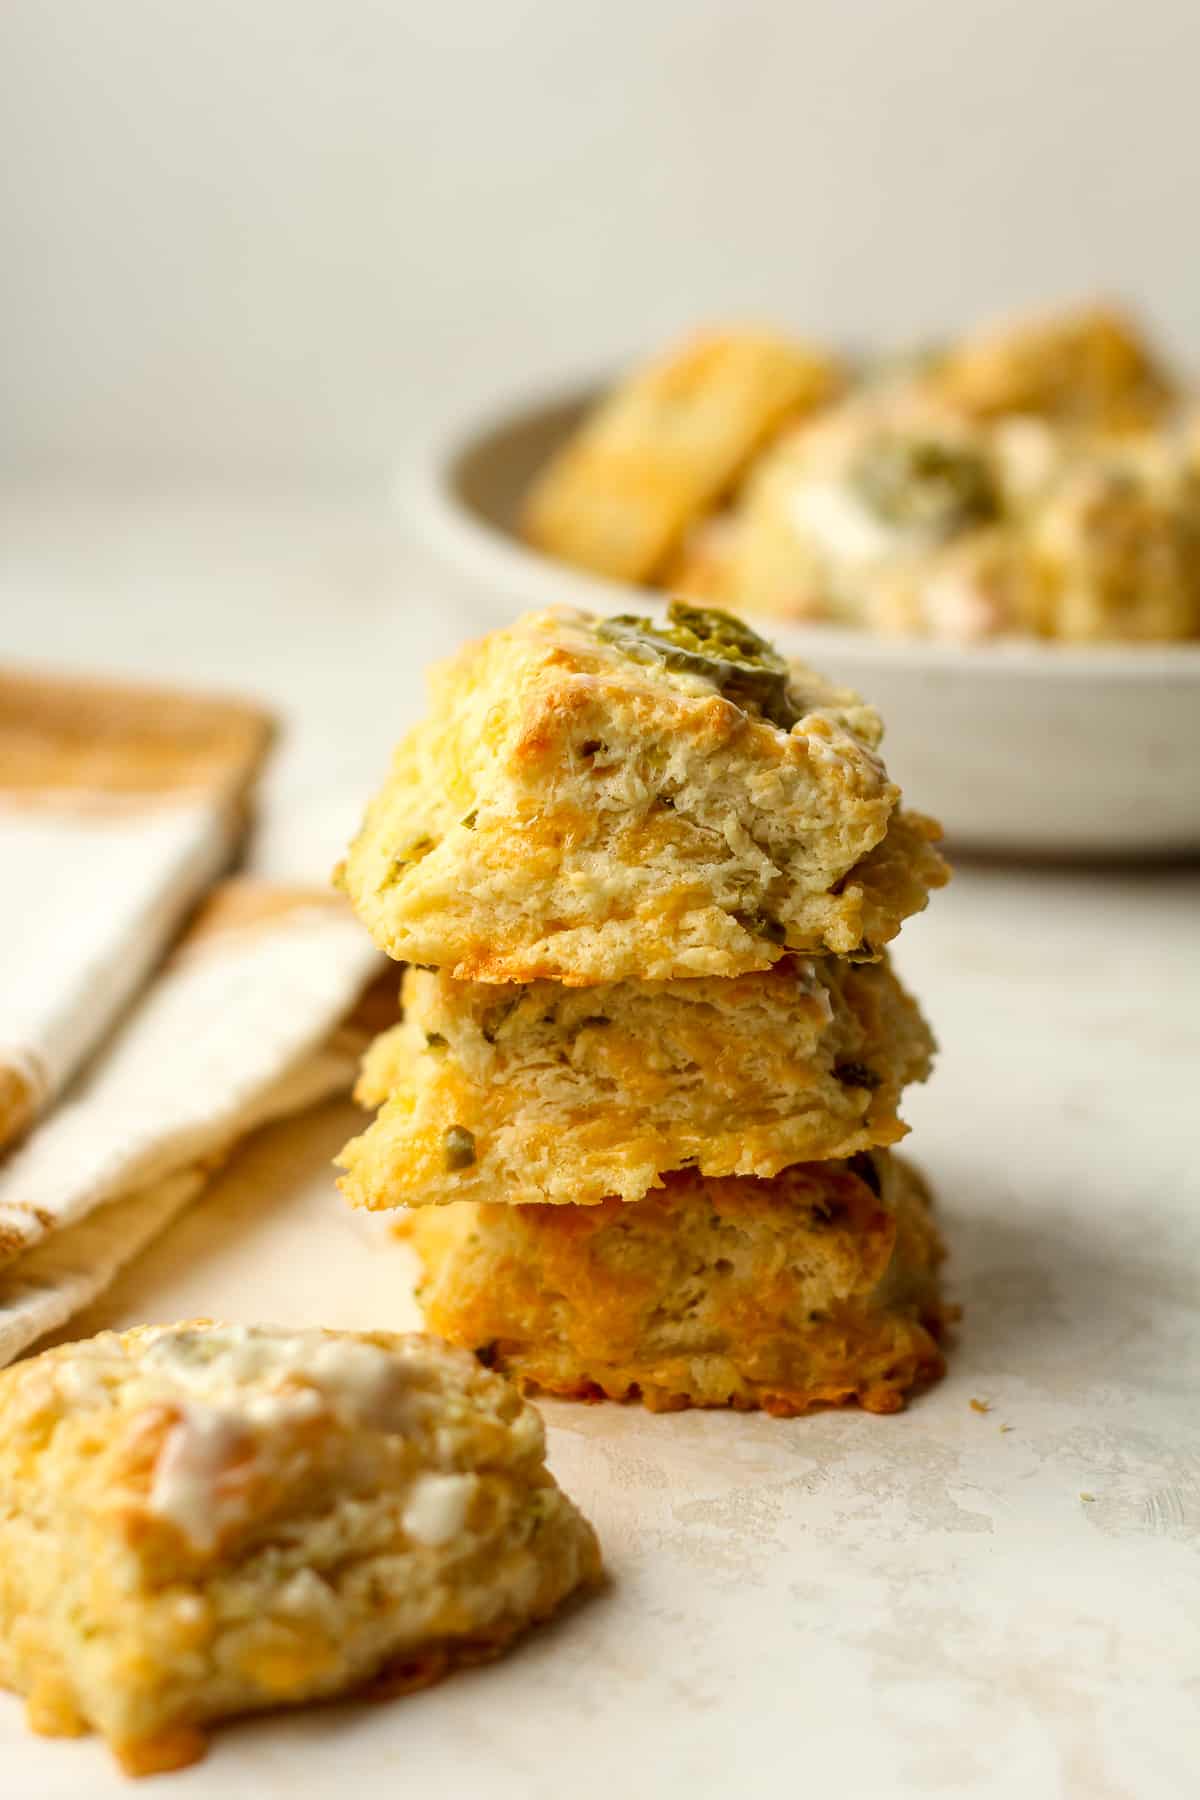 Three stacked jalapeño cheddar biscuits with a napkin.